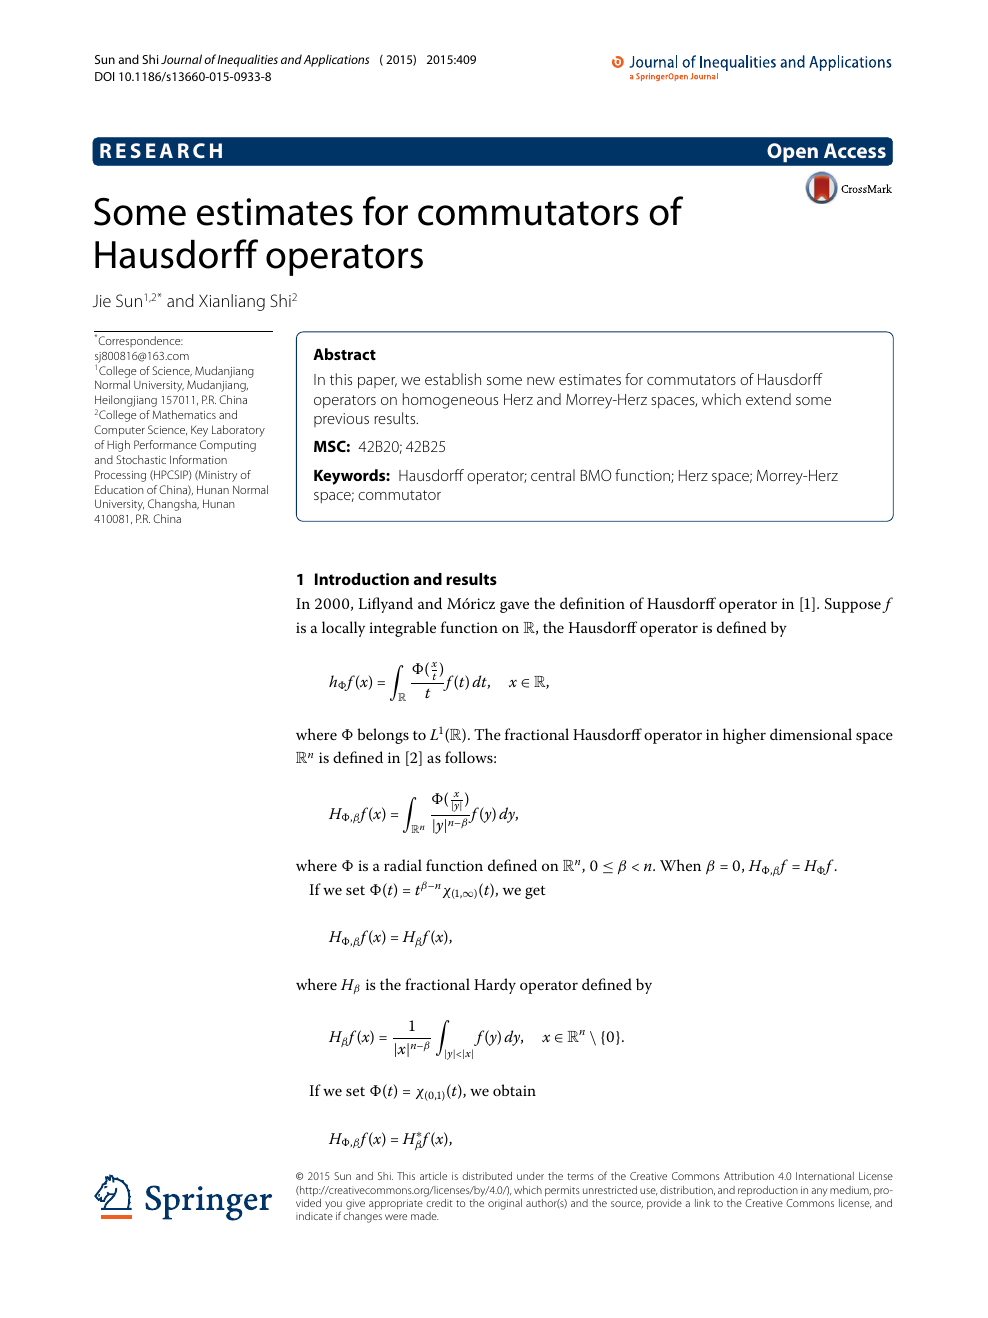 Some Estimates For Commutators Of Hausdorff Operators Topic Of Research Paper In Mathematics Download Scholarly Article Pdf And Read For Free On Cyberleninka Open Science Hub